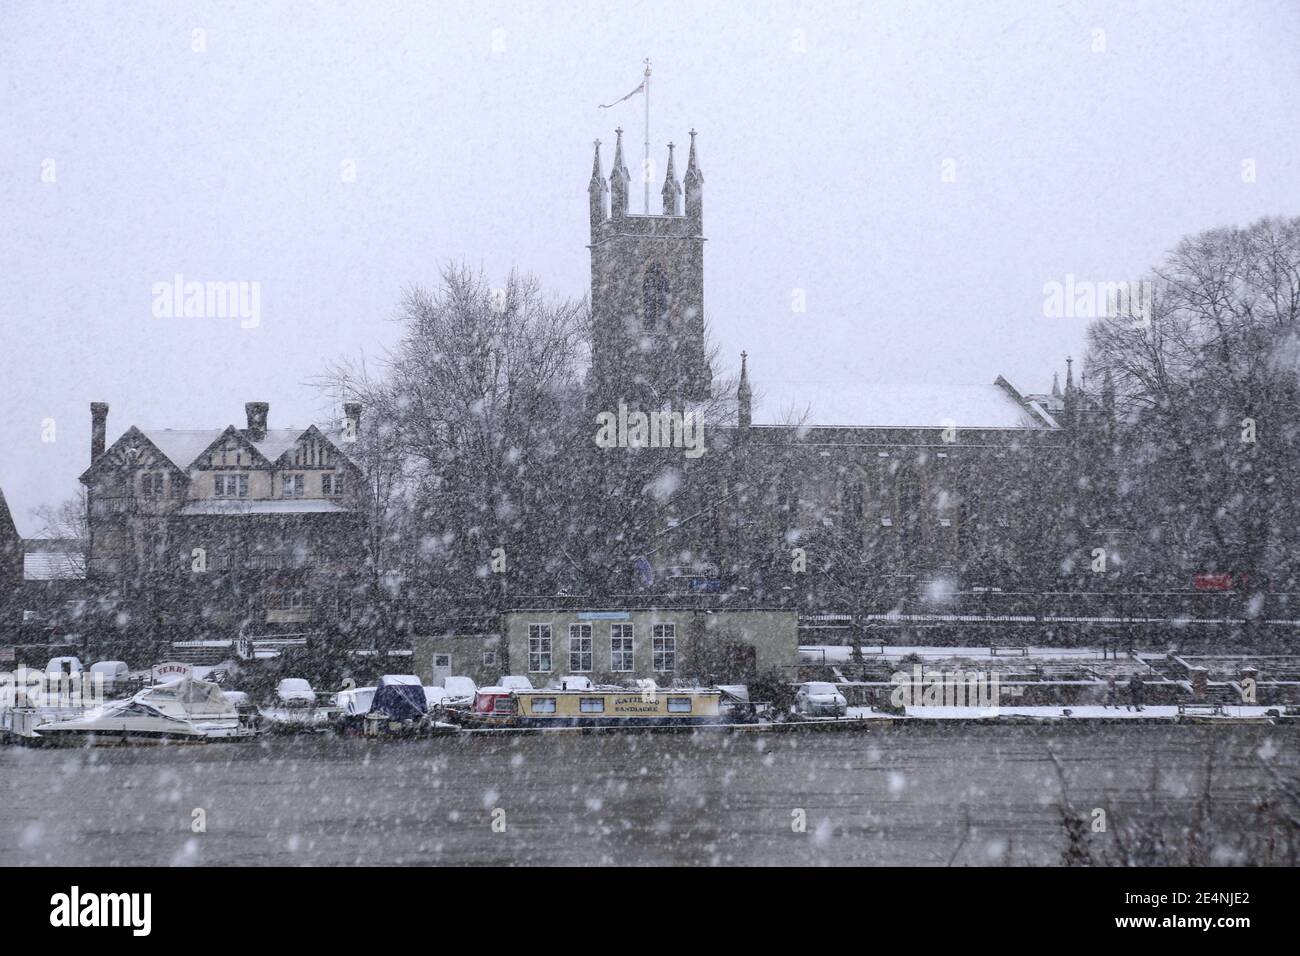 St Mary's Church at Hampton during heavy snow, seen from Sadlers Ride, Hurst Park, East Molesey, Surrey, England, Great Britain, UK, Europe Stock Photo